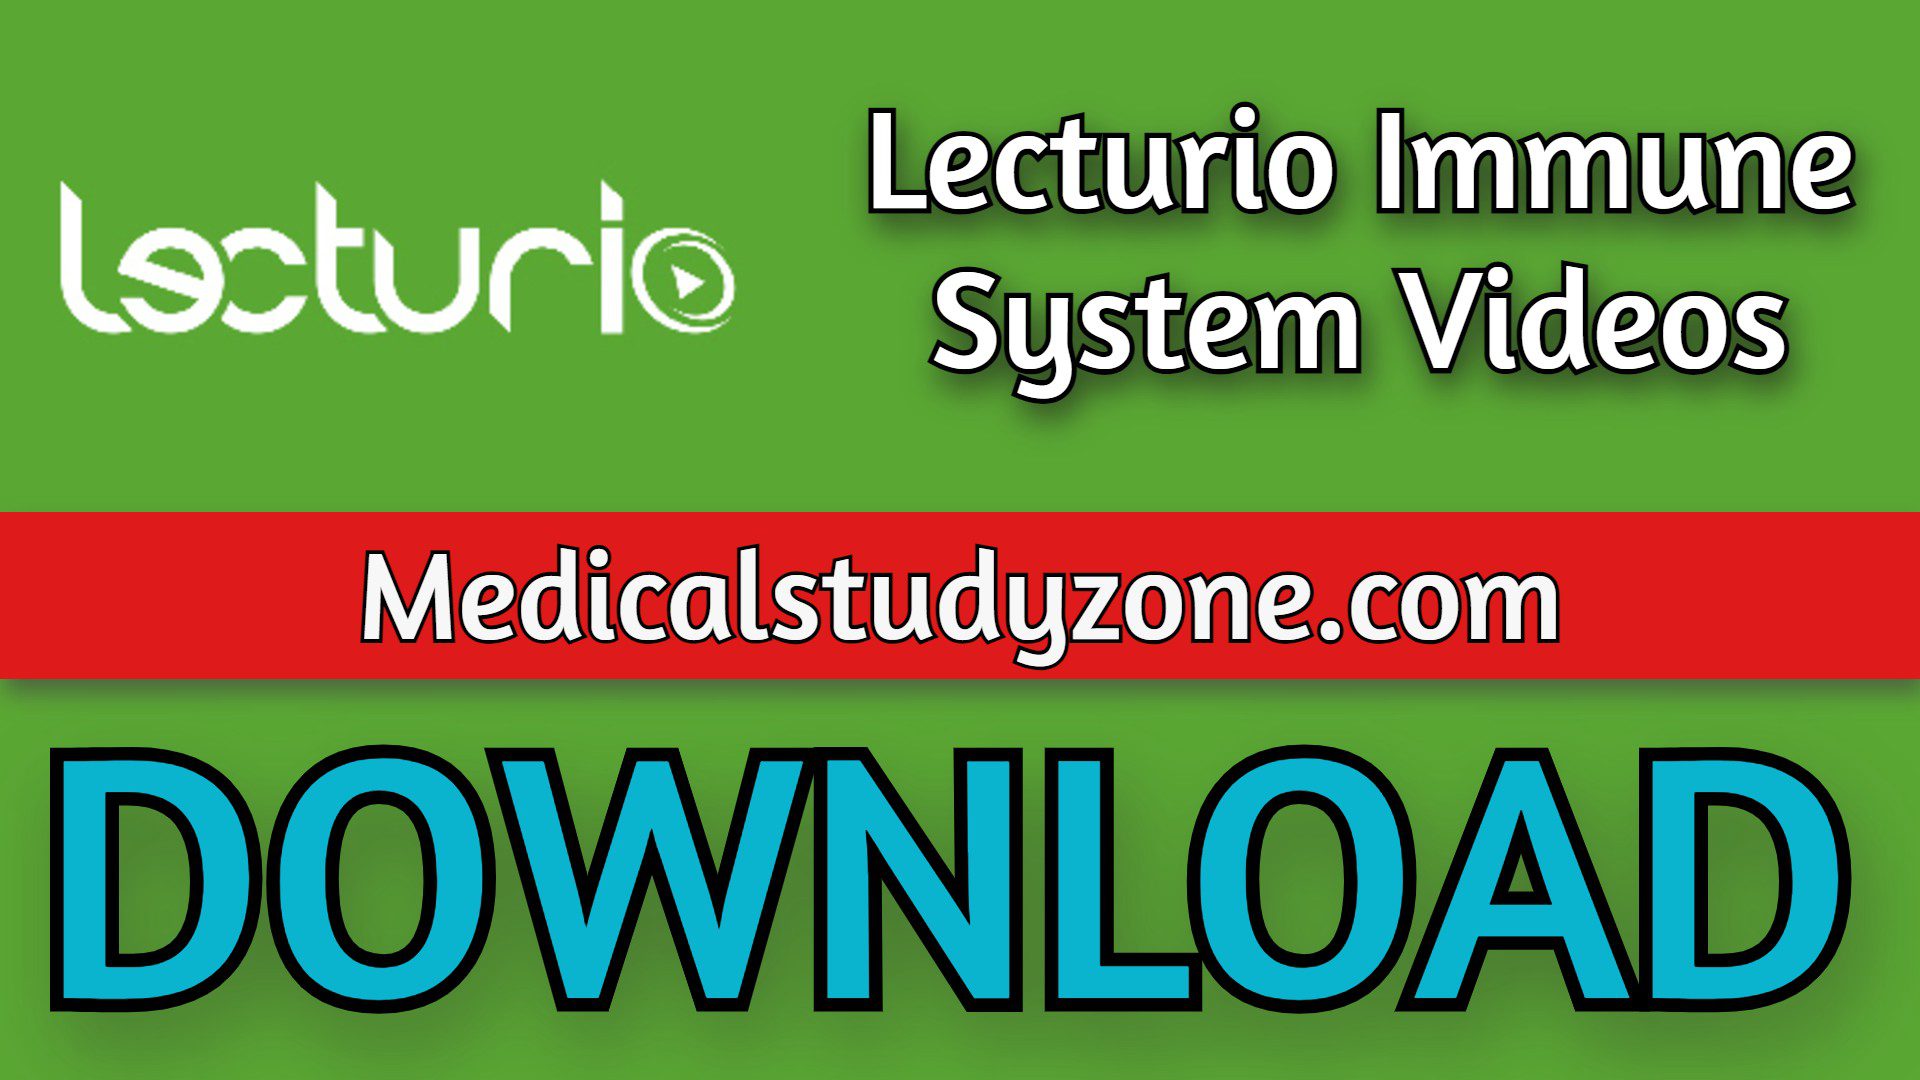 Lecturio Immune System Videos 2021 Free Download